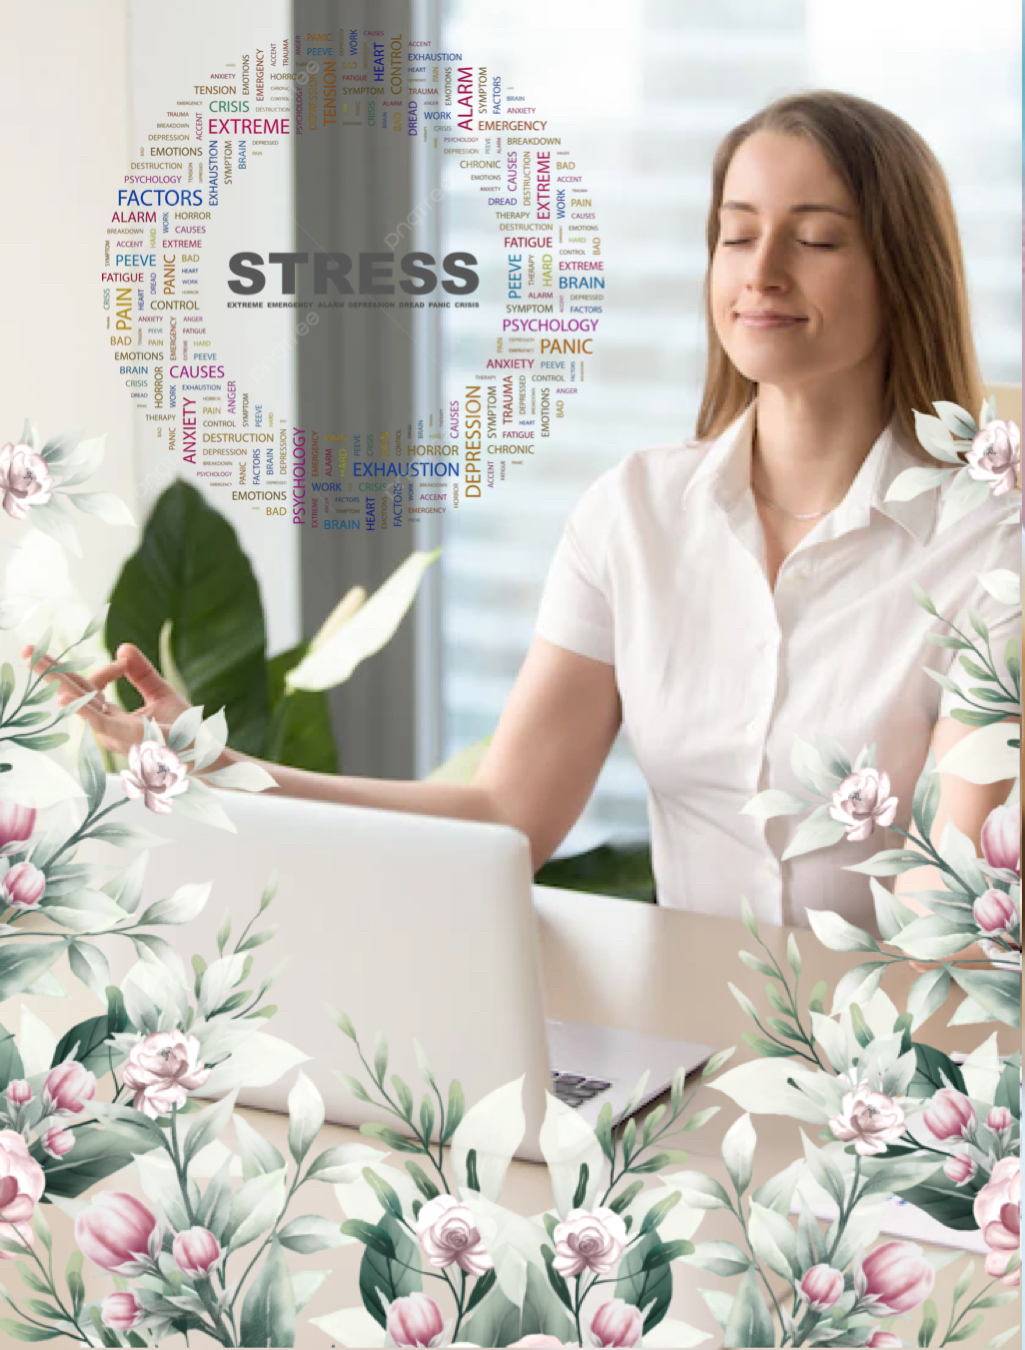 Understanding Stress Reactivity and Its Impact on Health